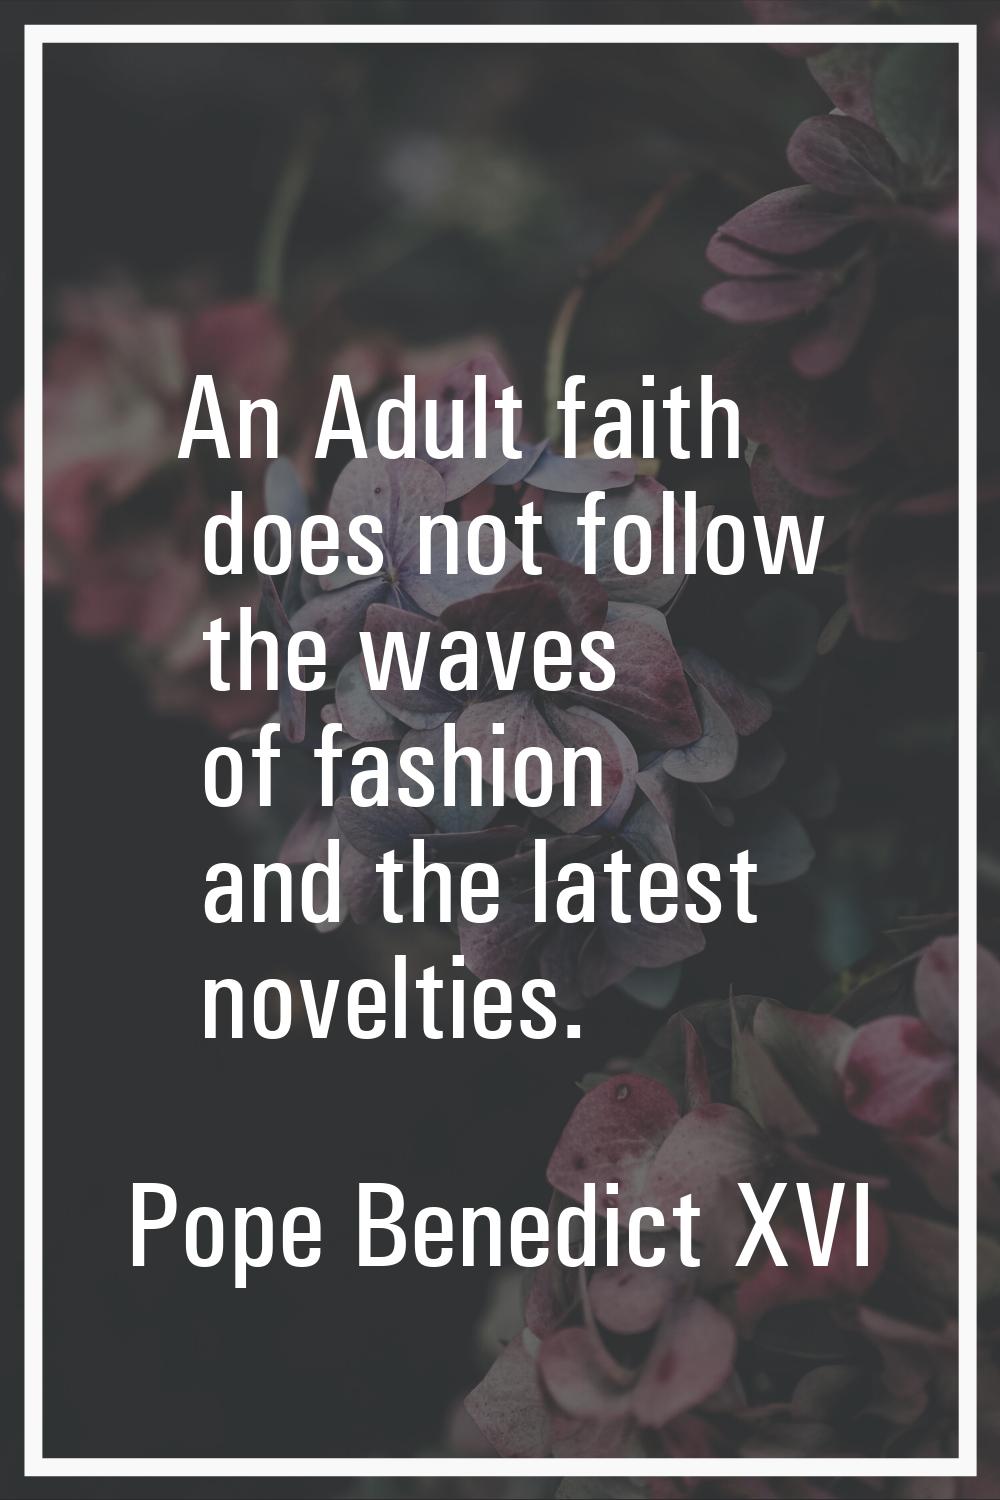 An Adult faith does not follow the waves of fashion and the latest novelties.